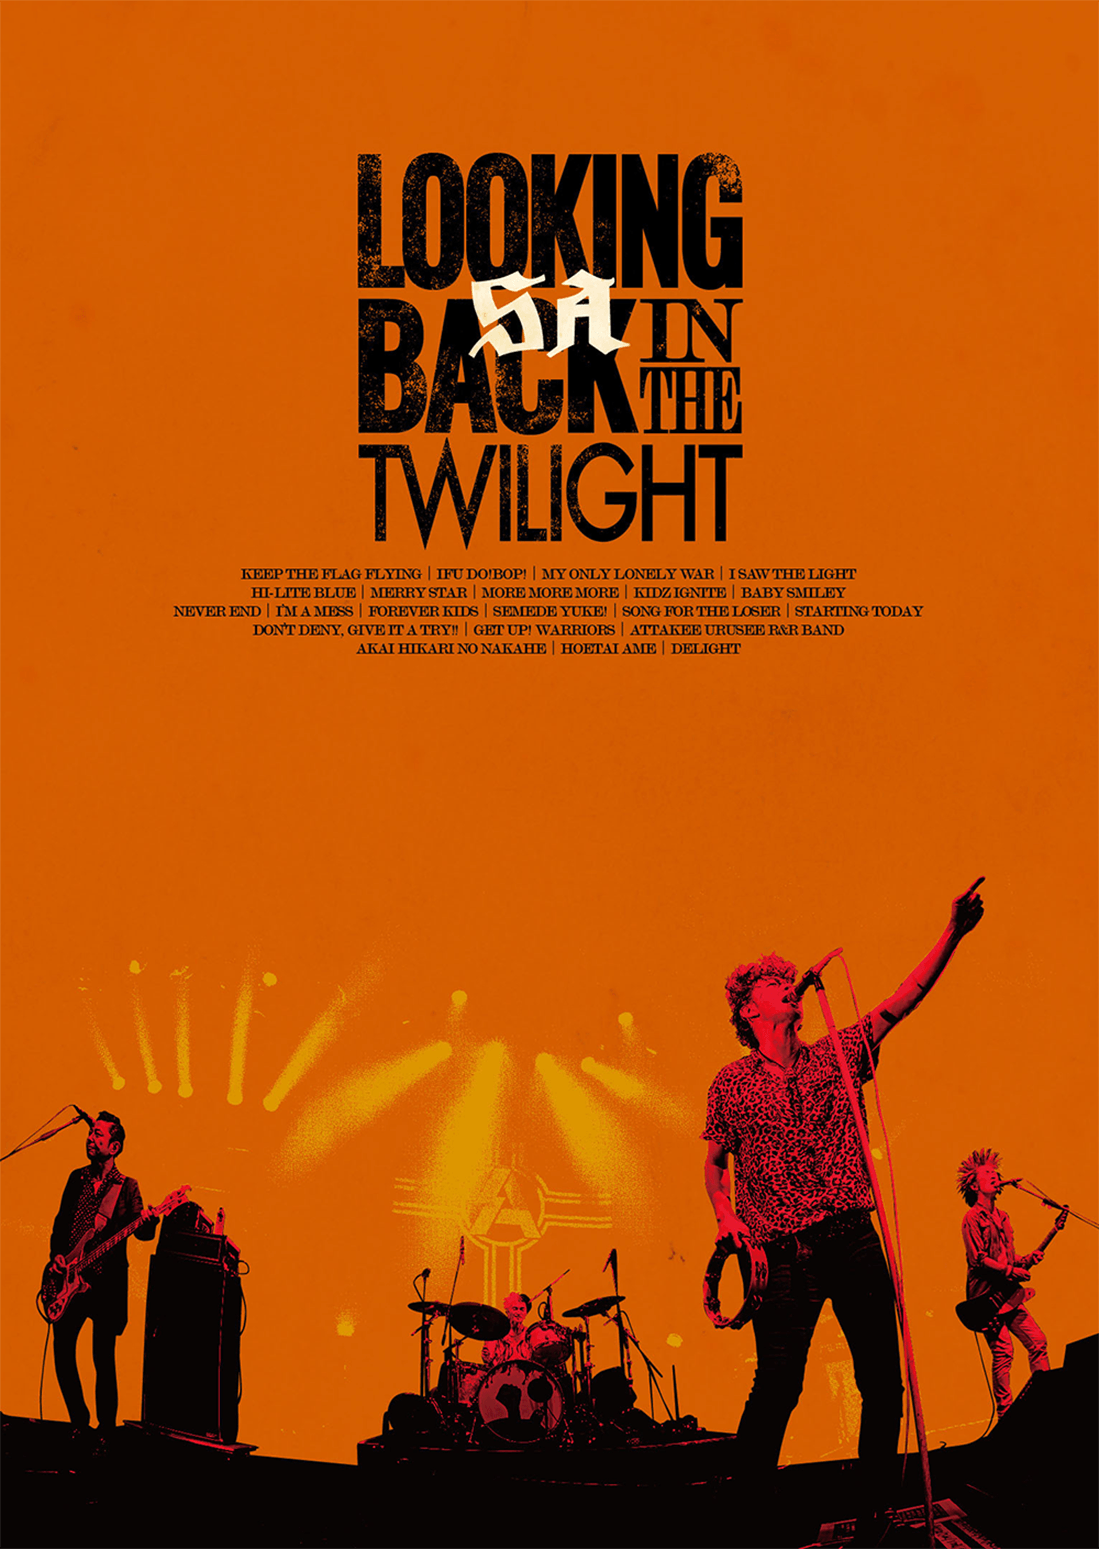 SA LIVE Blu-ray & DVD [ LOOKING BACK IN THE TWILIGHT ] 特設サイト